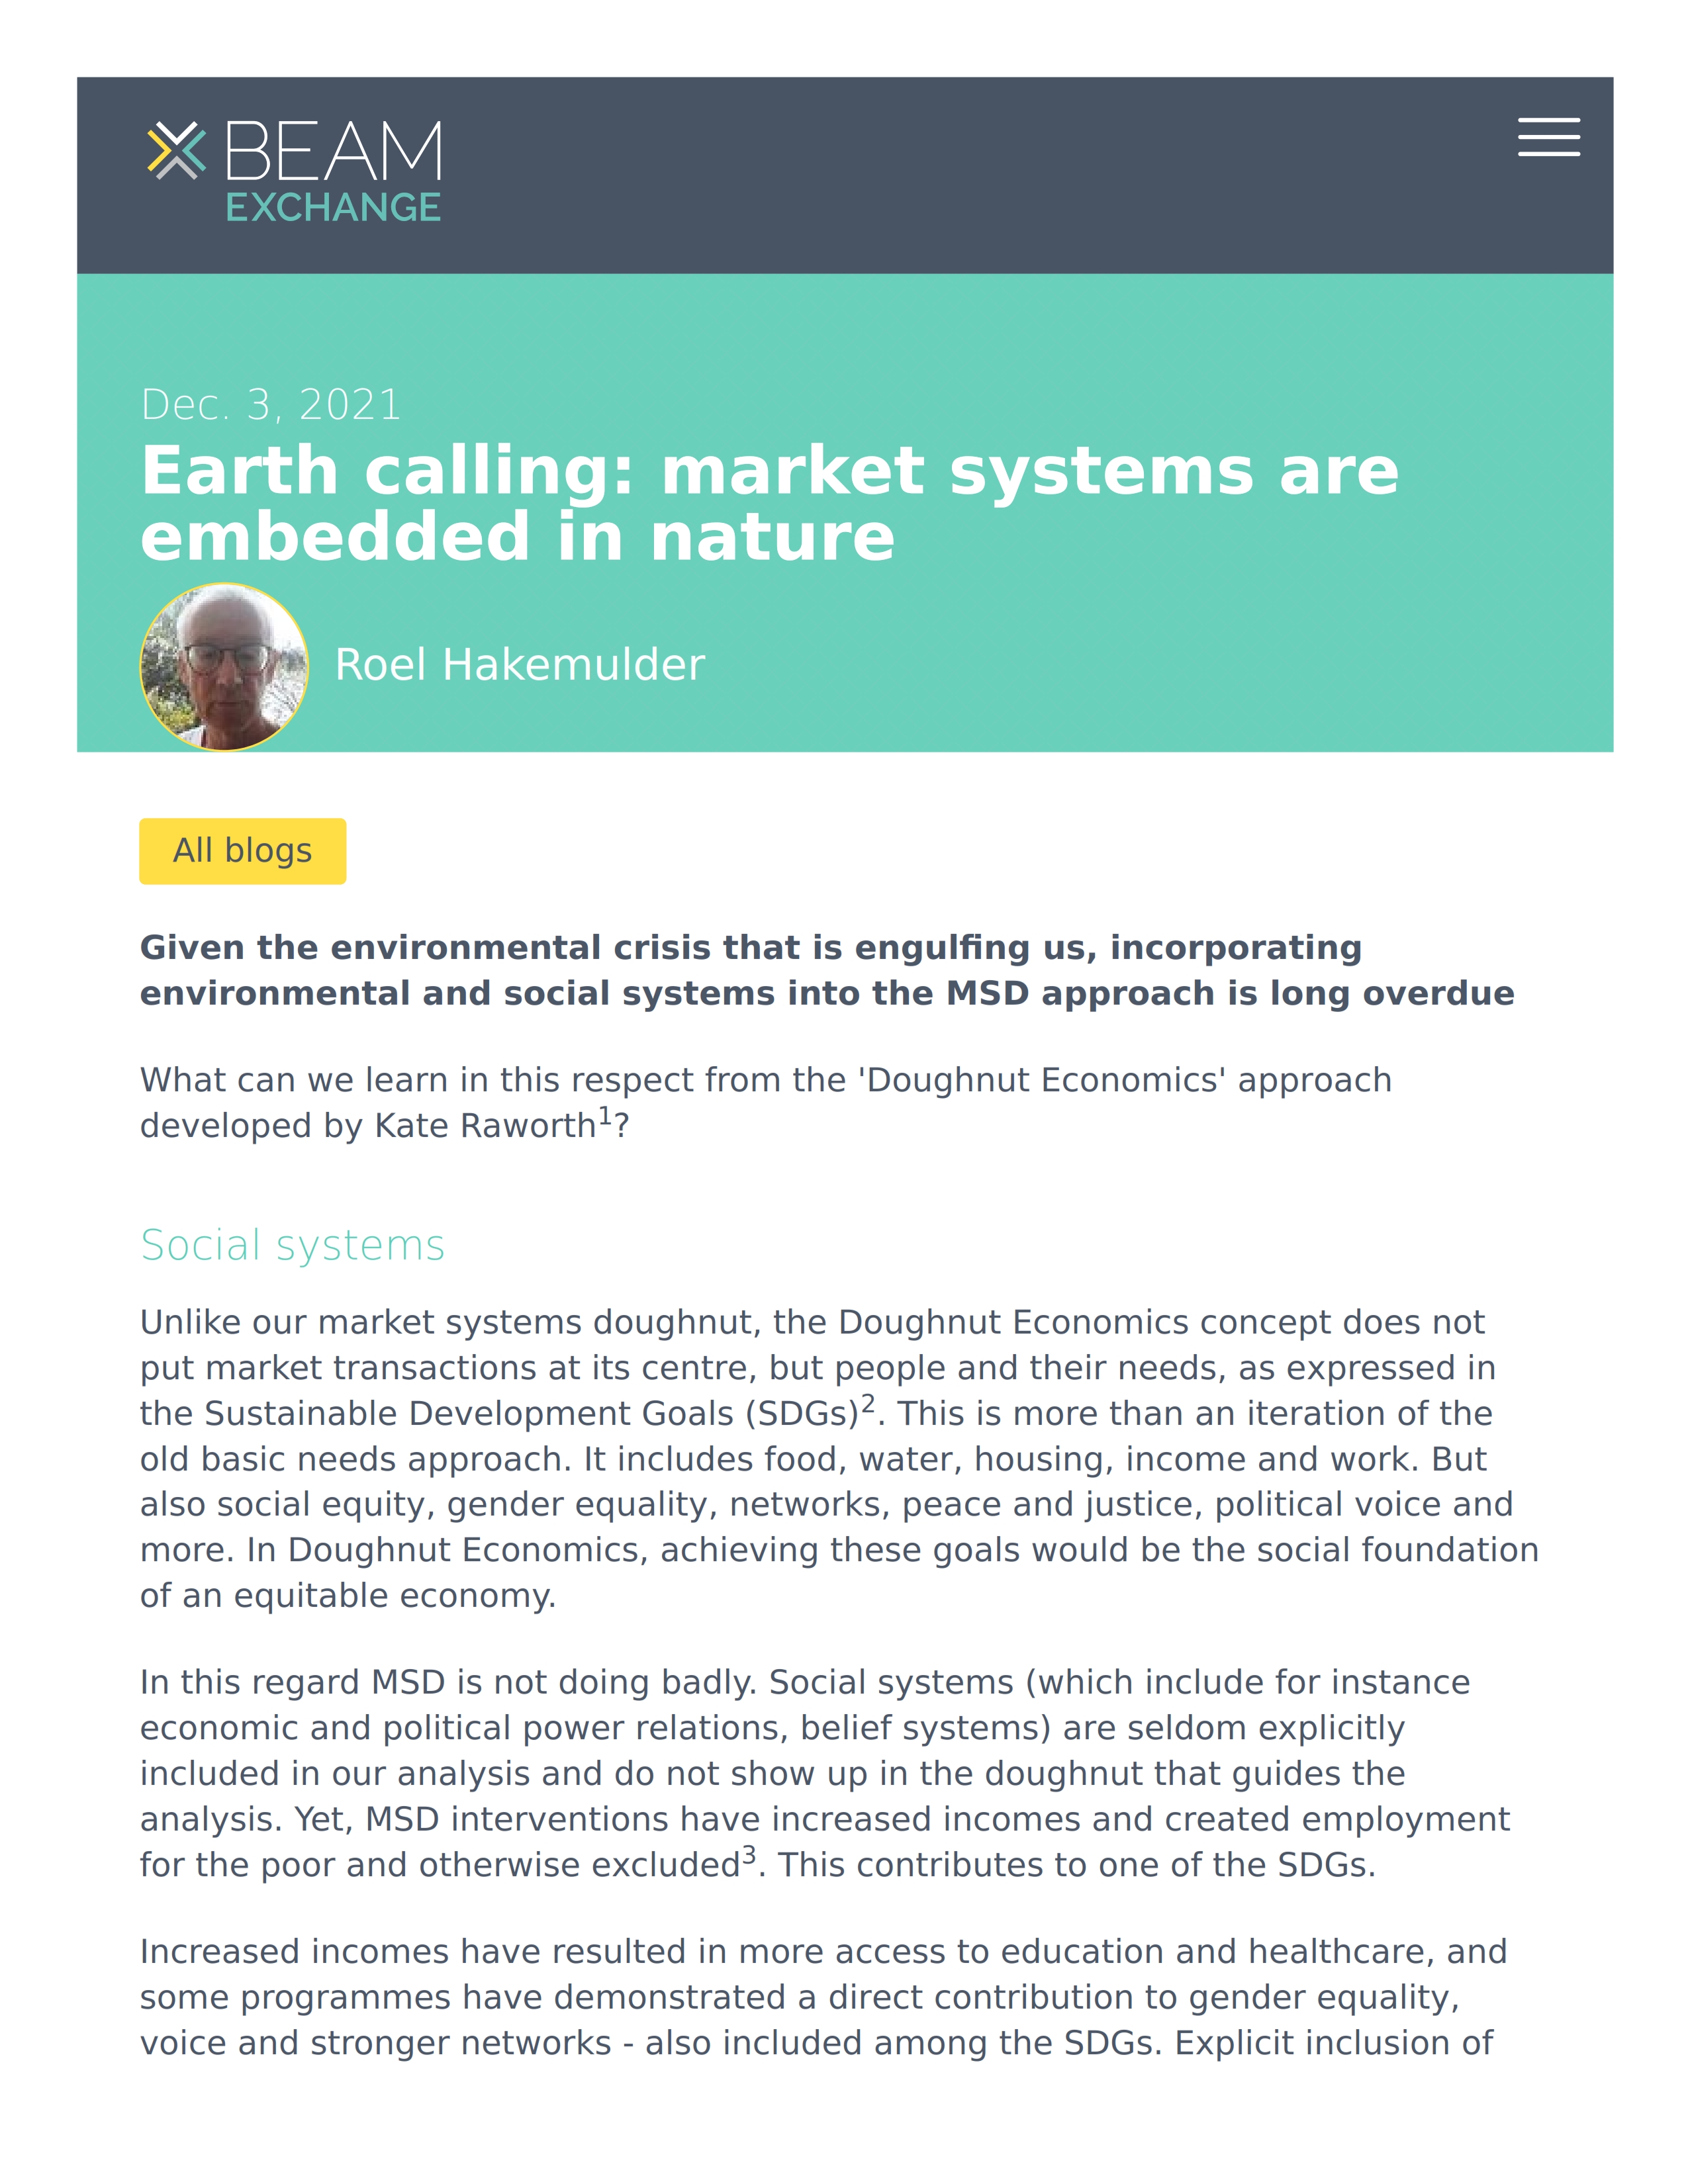 Earth calling: market systems are embedded in nature